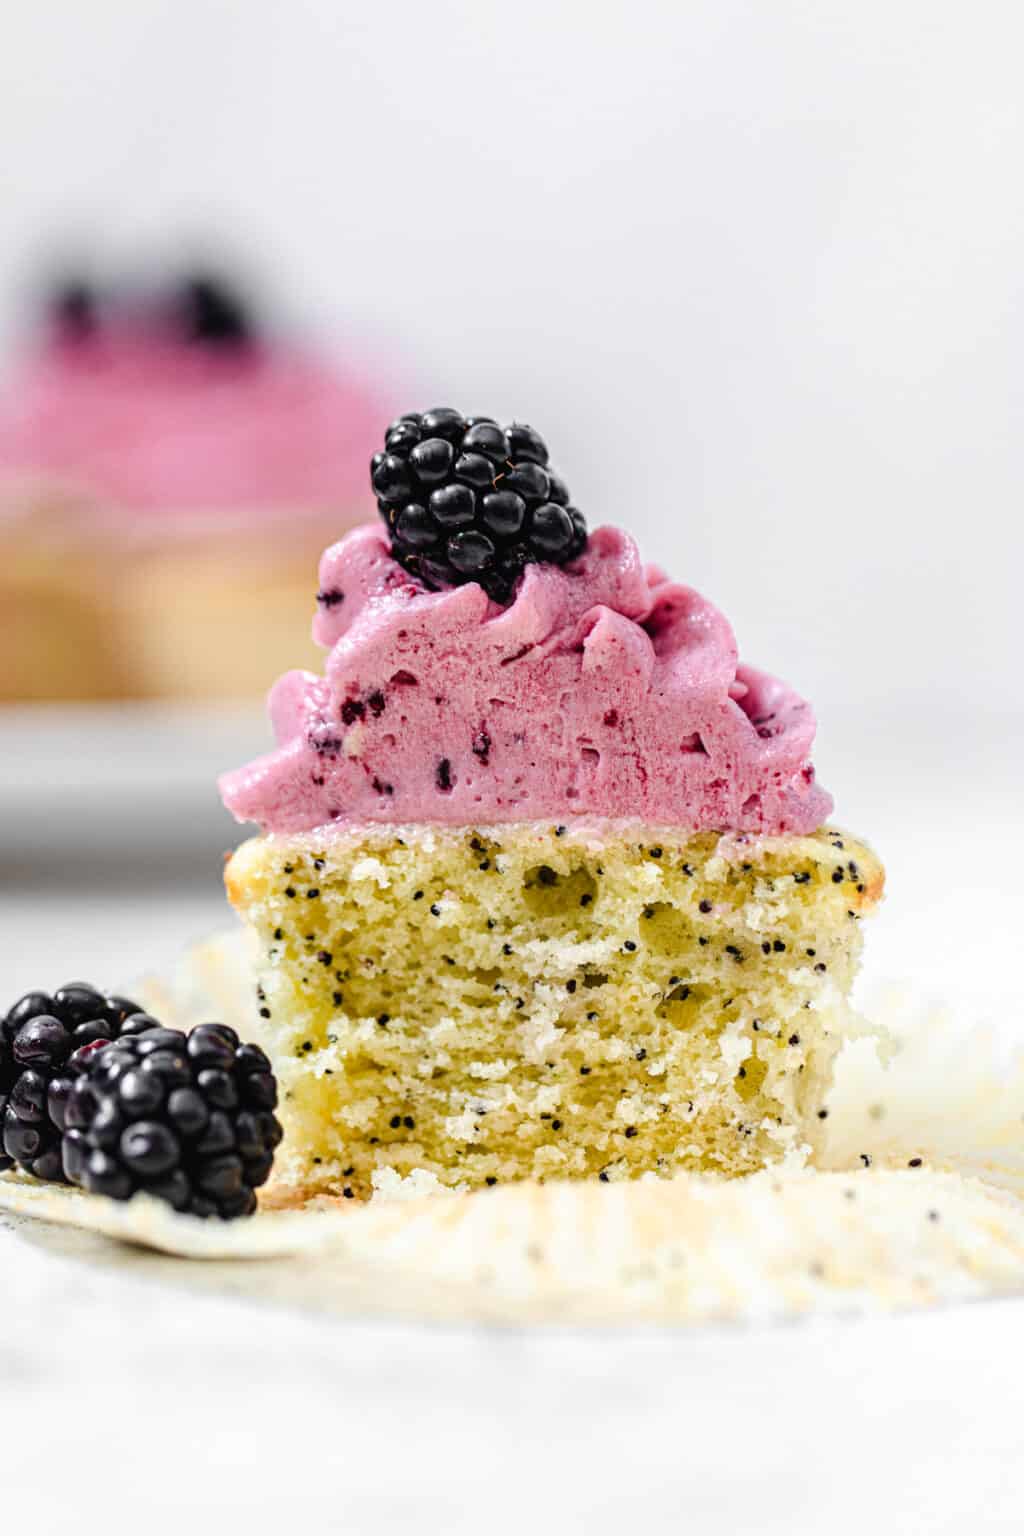 Lemon Poppy Seed Cupcakes with Blackberry Buttercream | Queenslee Appétit